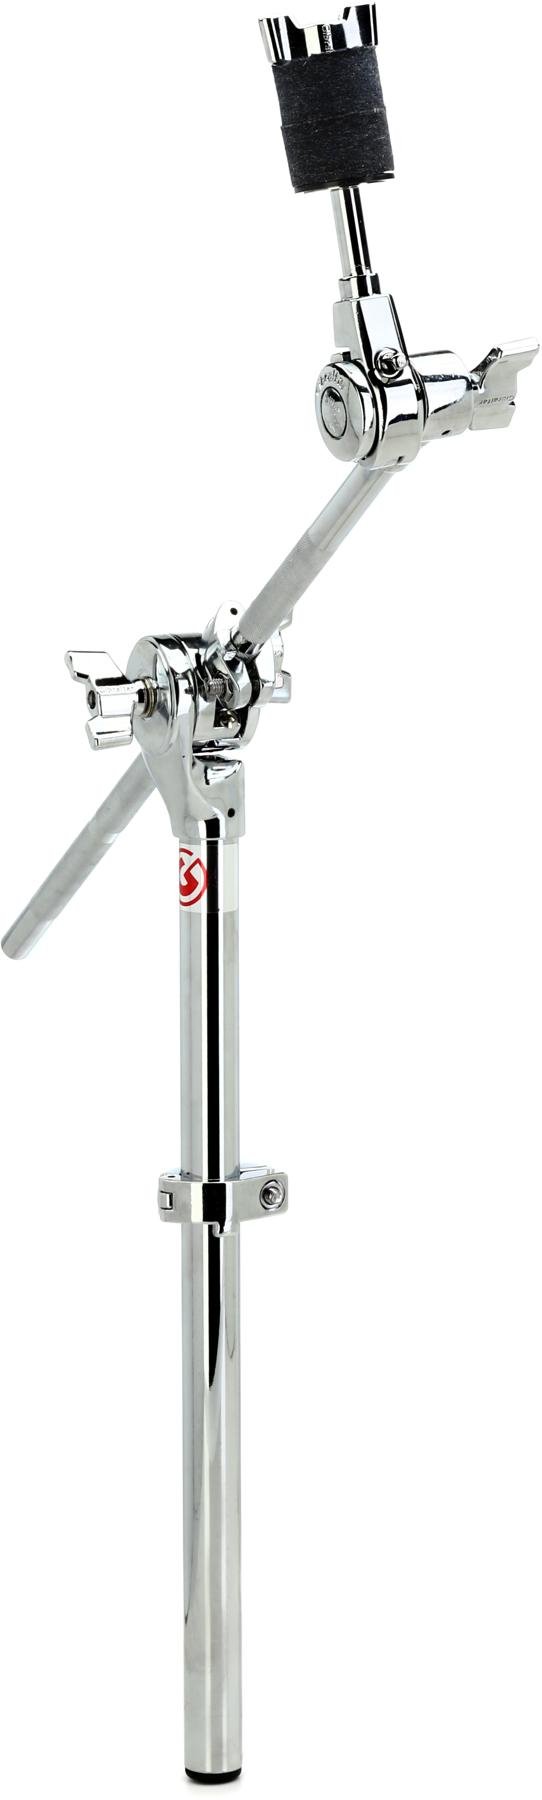 Gibraltar SC-LBBT Long Cymbal Boom Arm with Brake Tilter | Sweetwater